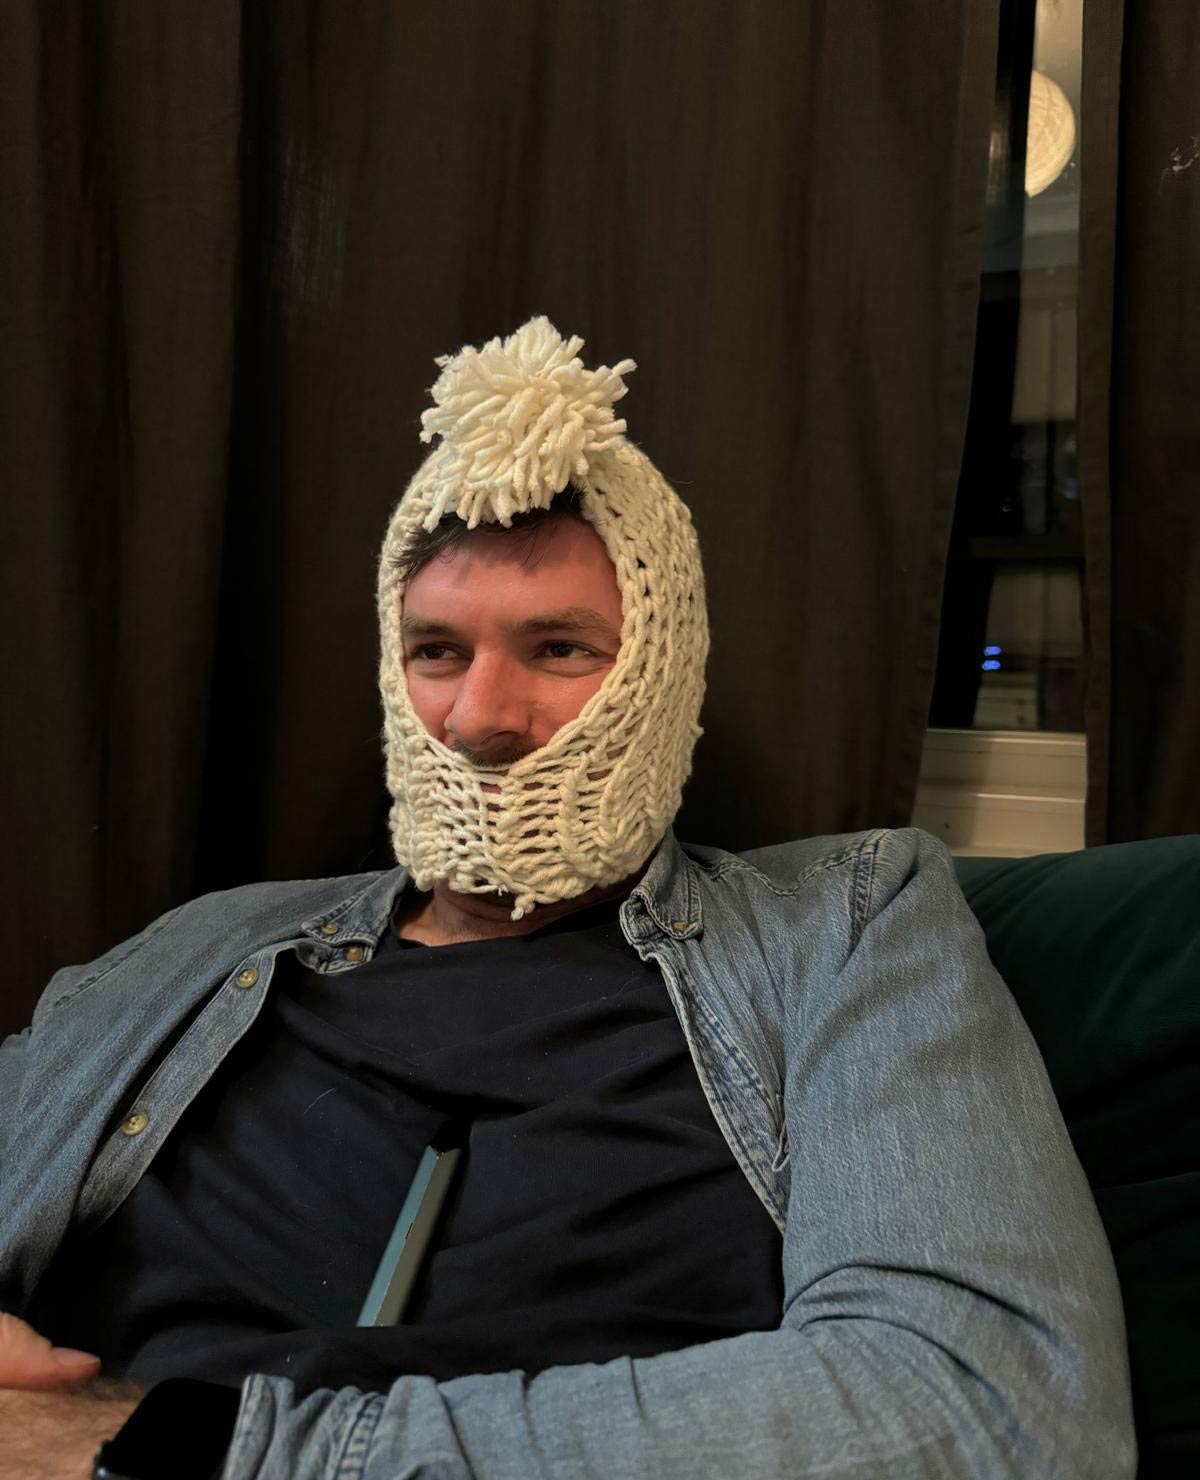 Sister started knitting and my BIL wore the hat she made